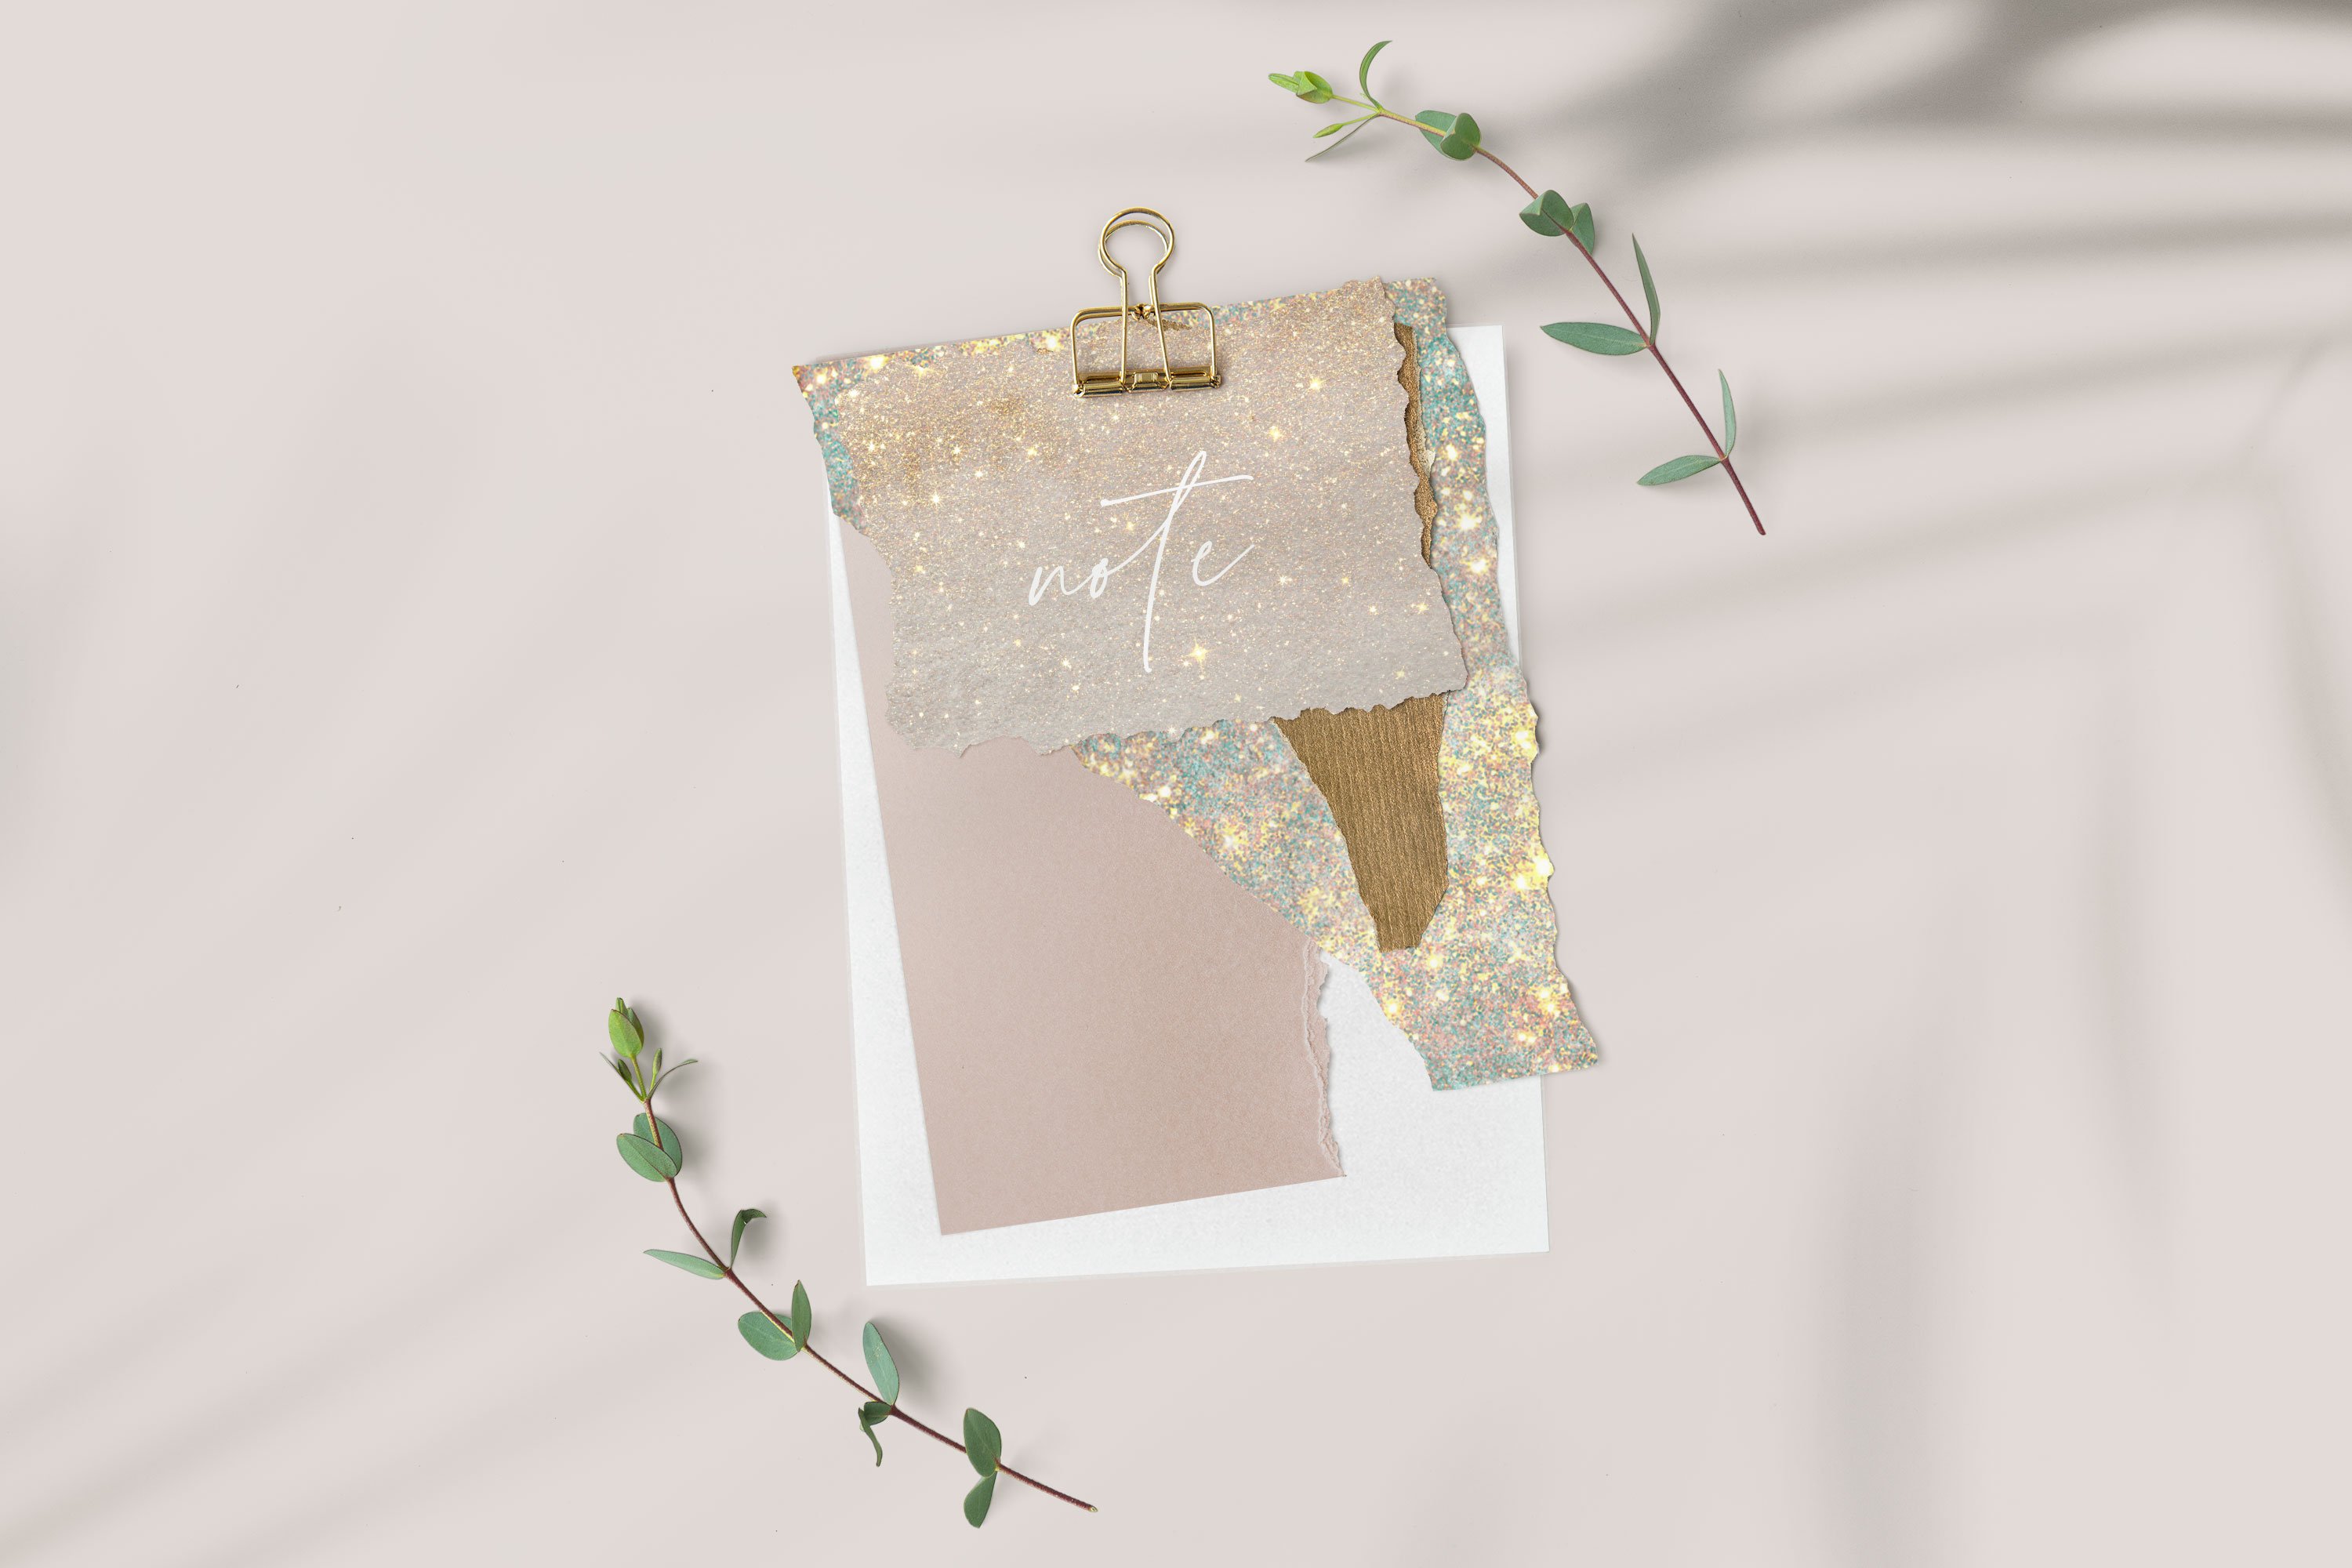 Gold Watercolor Shapes PNG Overlays